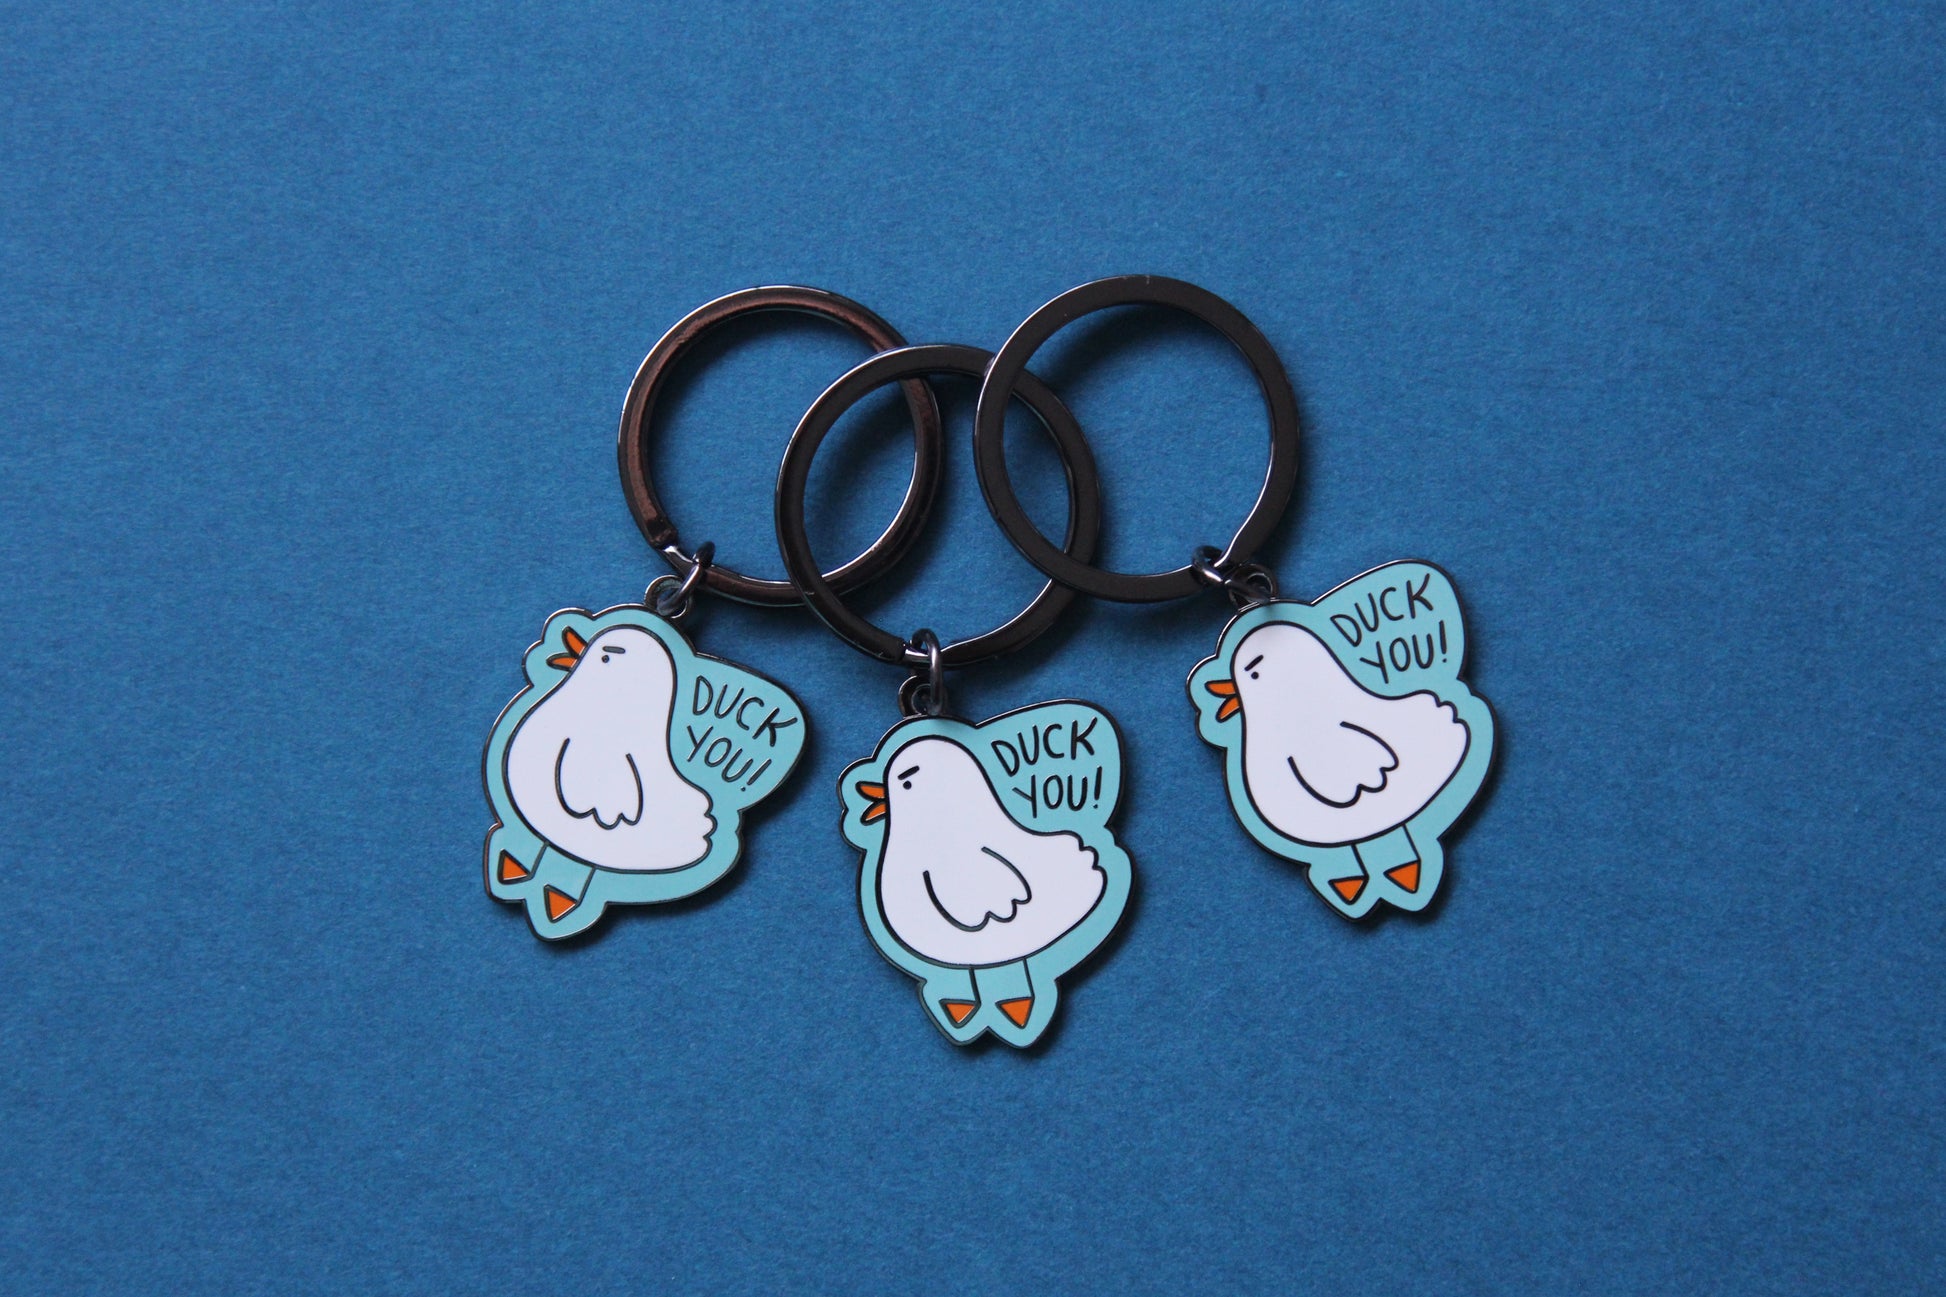 3 enamel keychains showing an angry white duck saying "Duck you!" over a teal background.